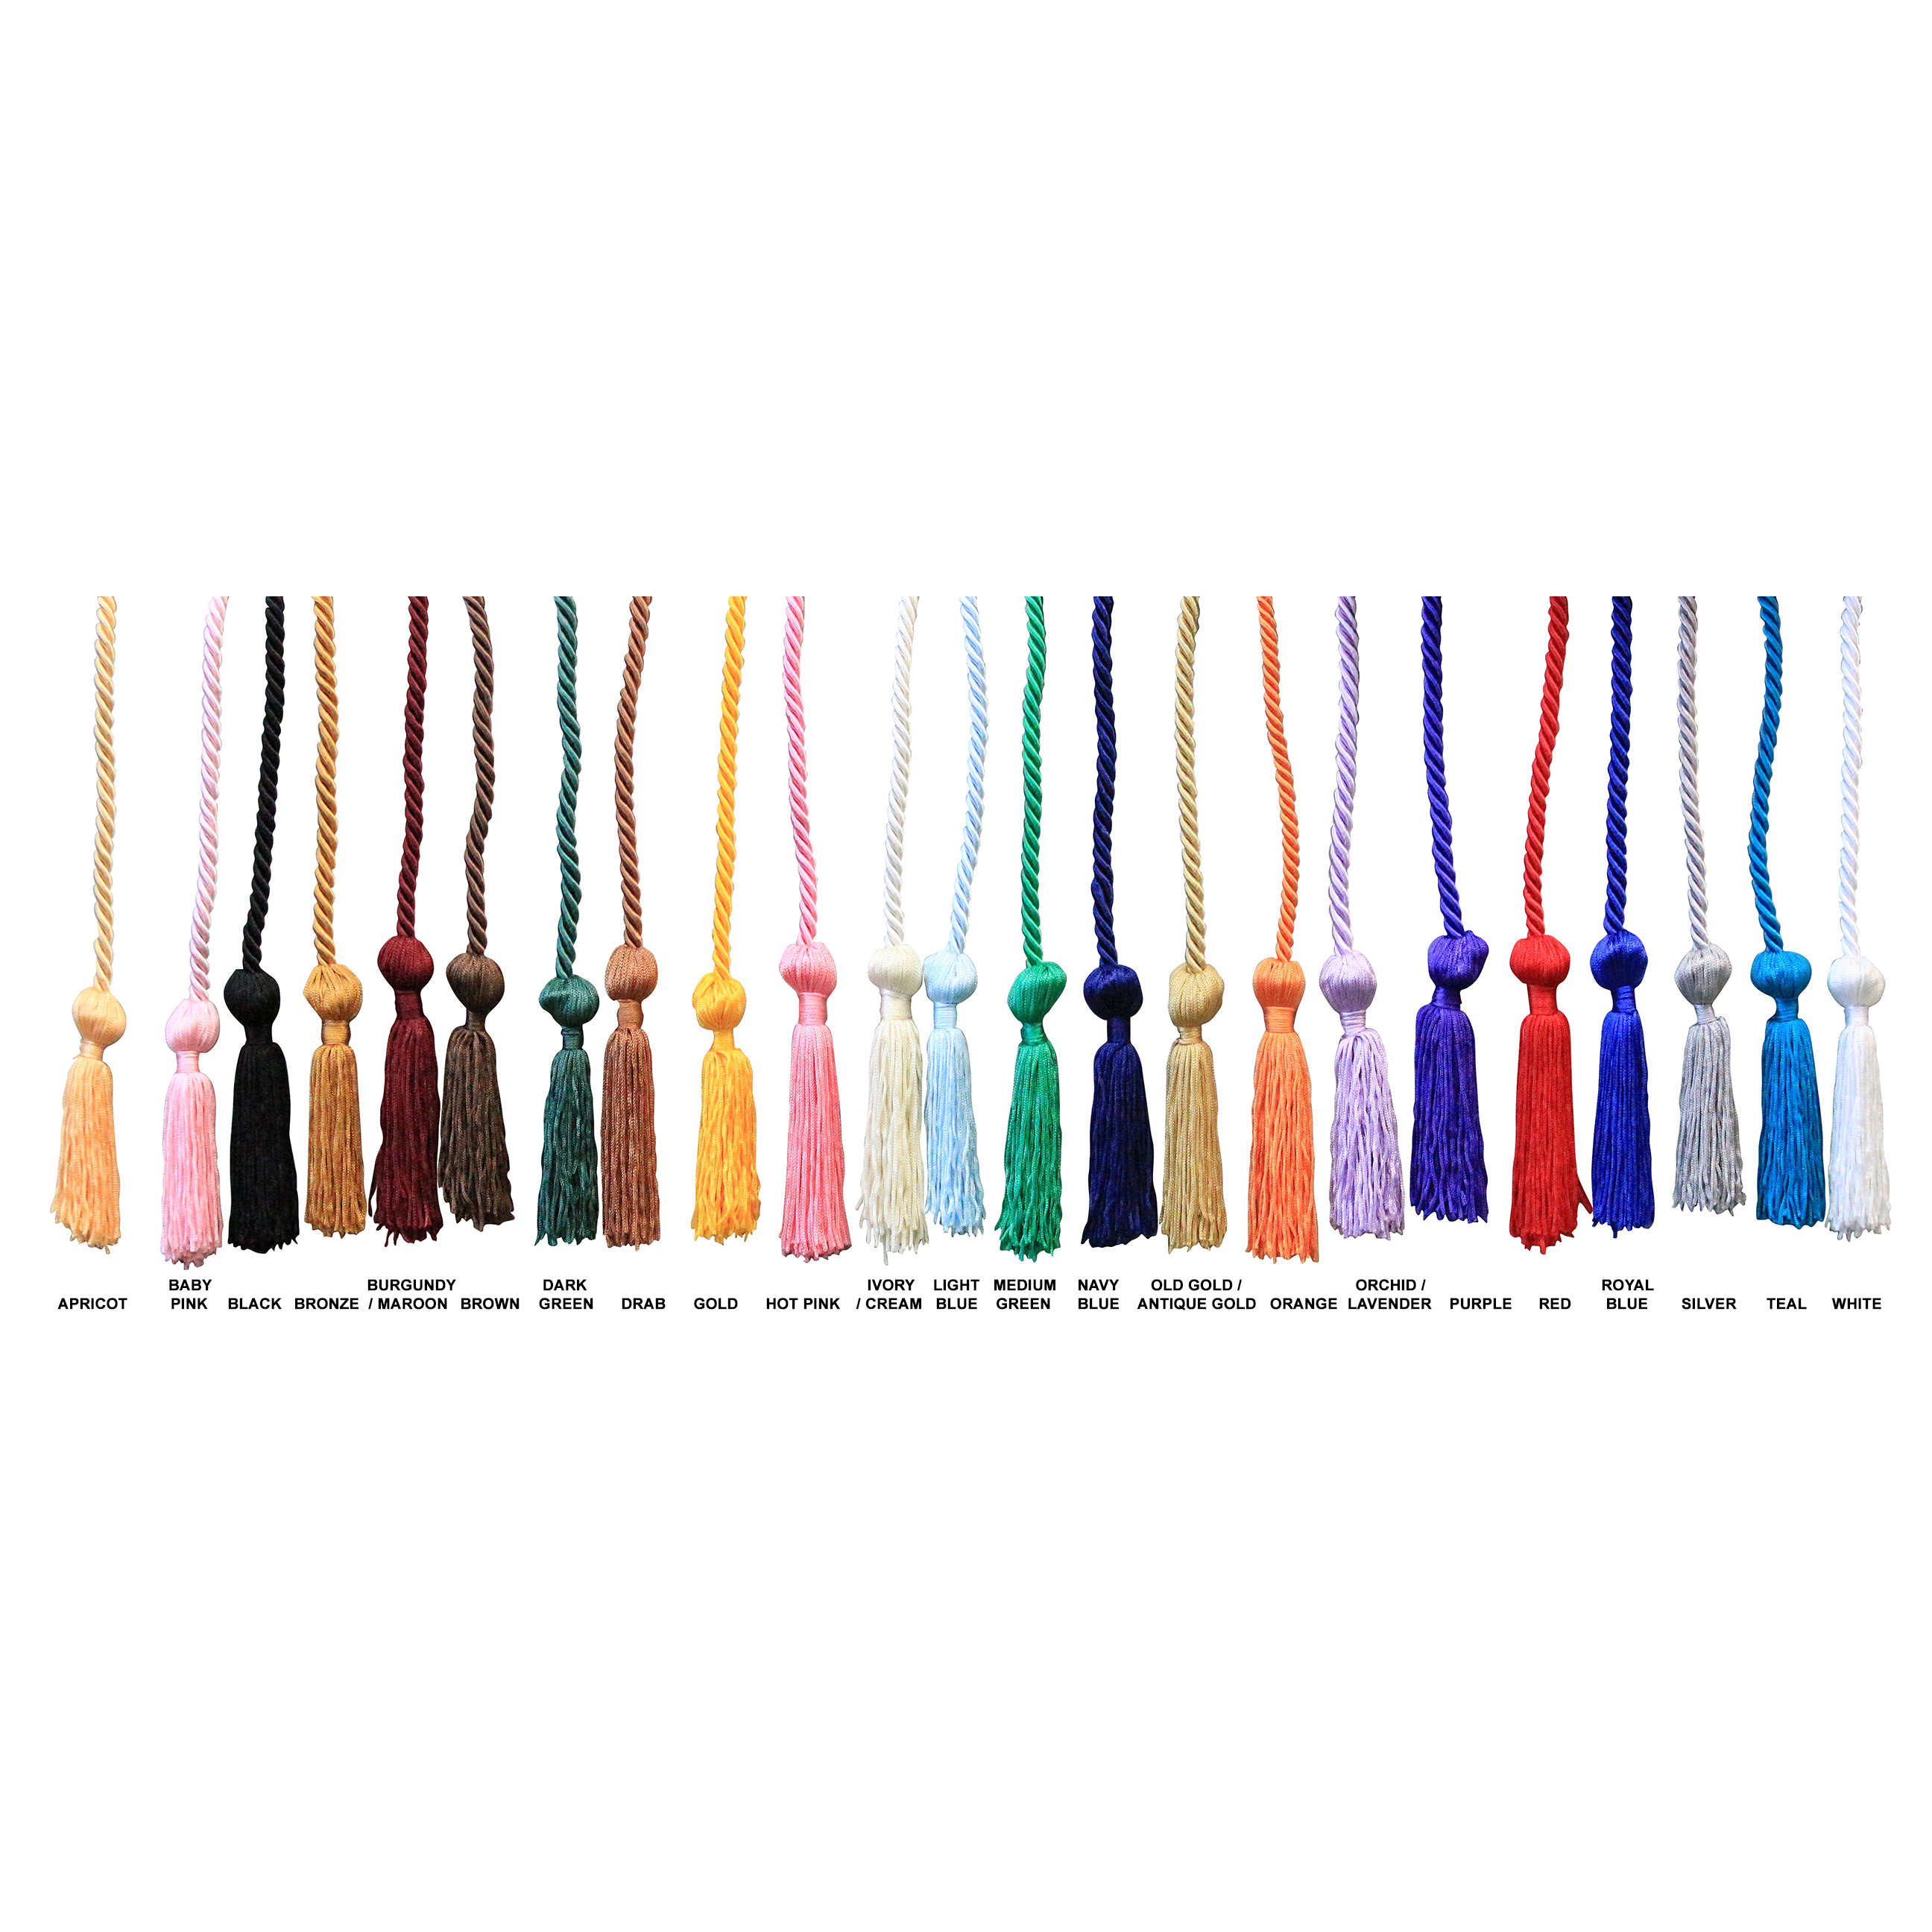 Royal Blue Bright Gold Red Honor Cords, Senior Class Graduation Products